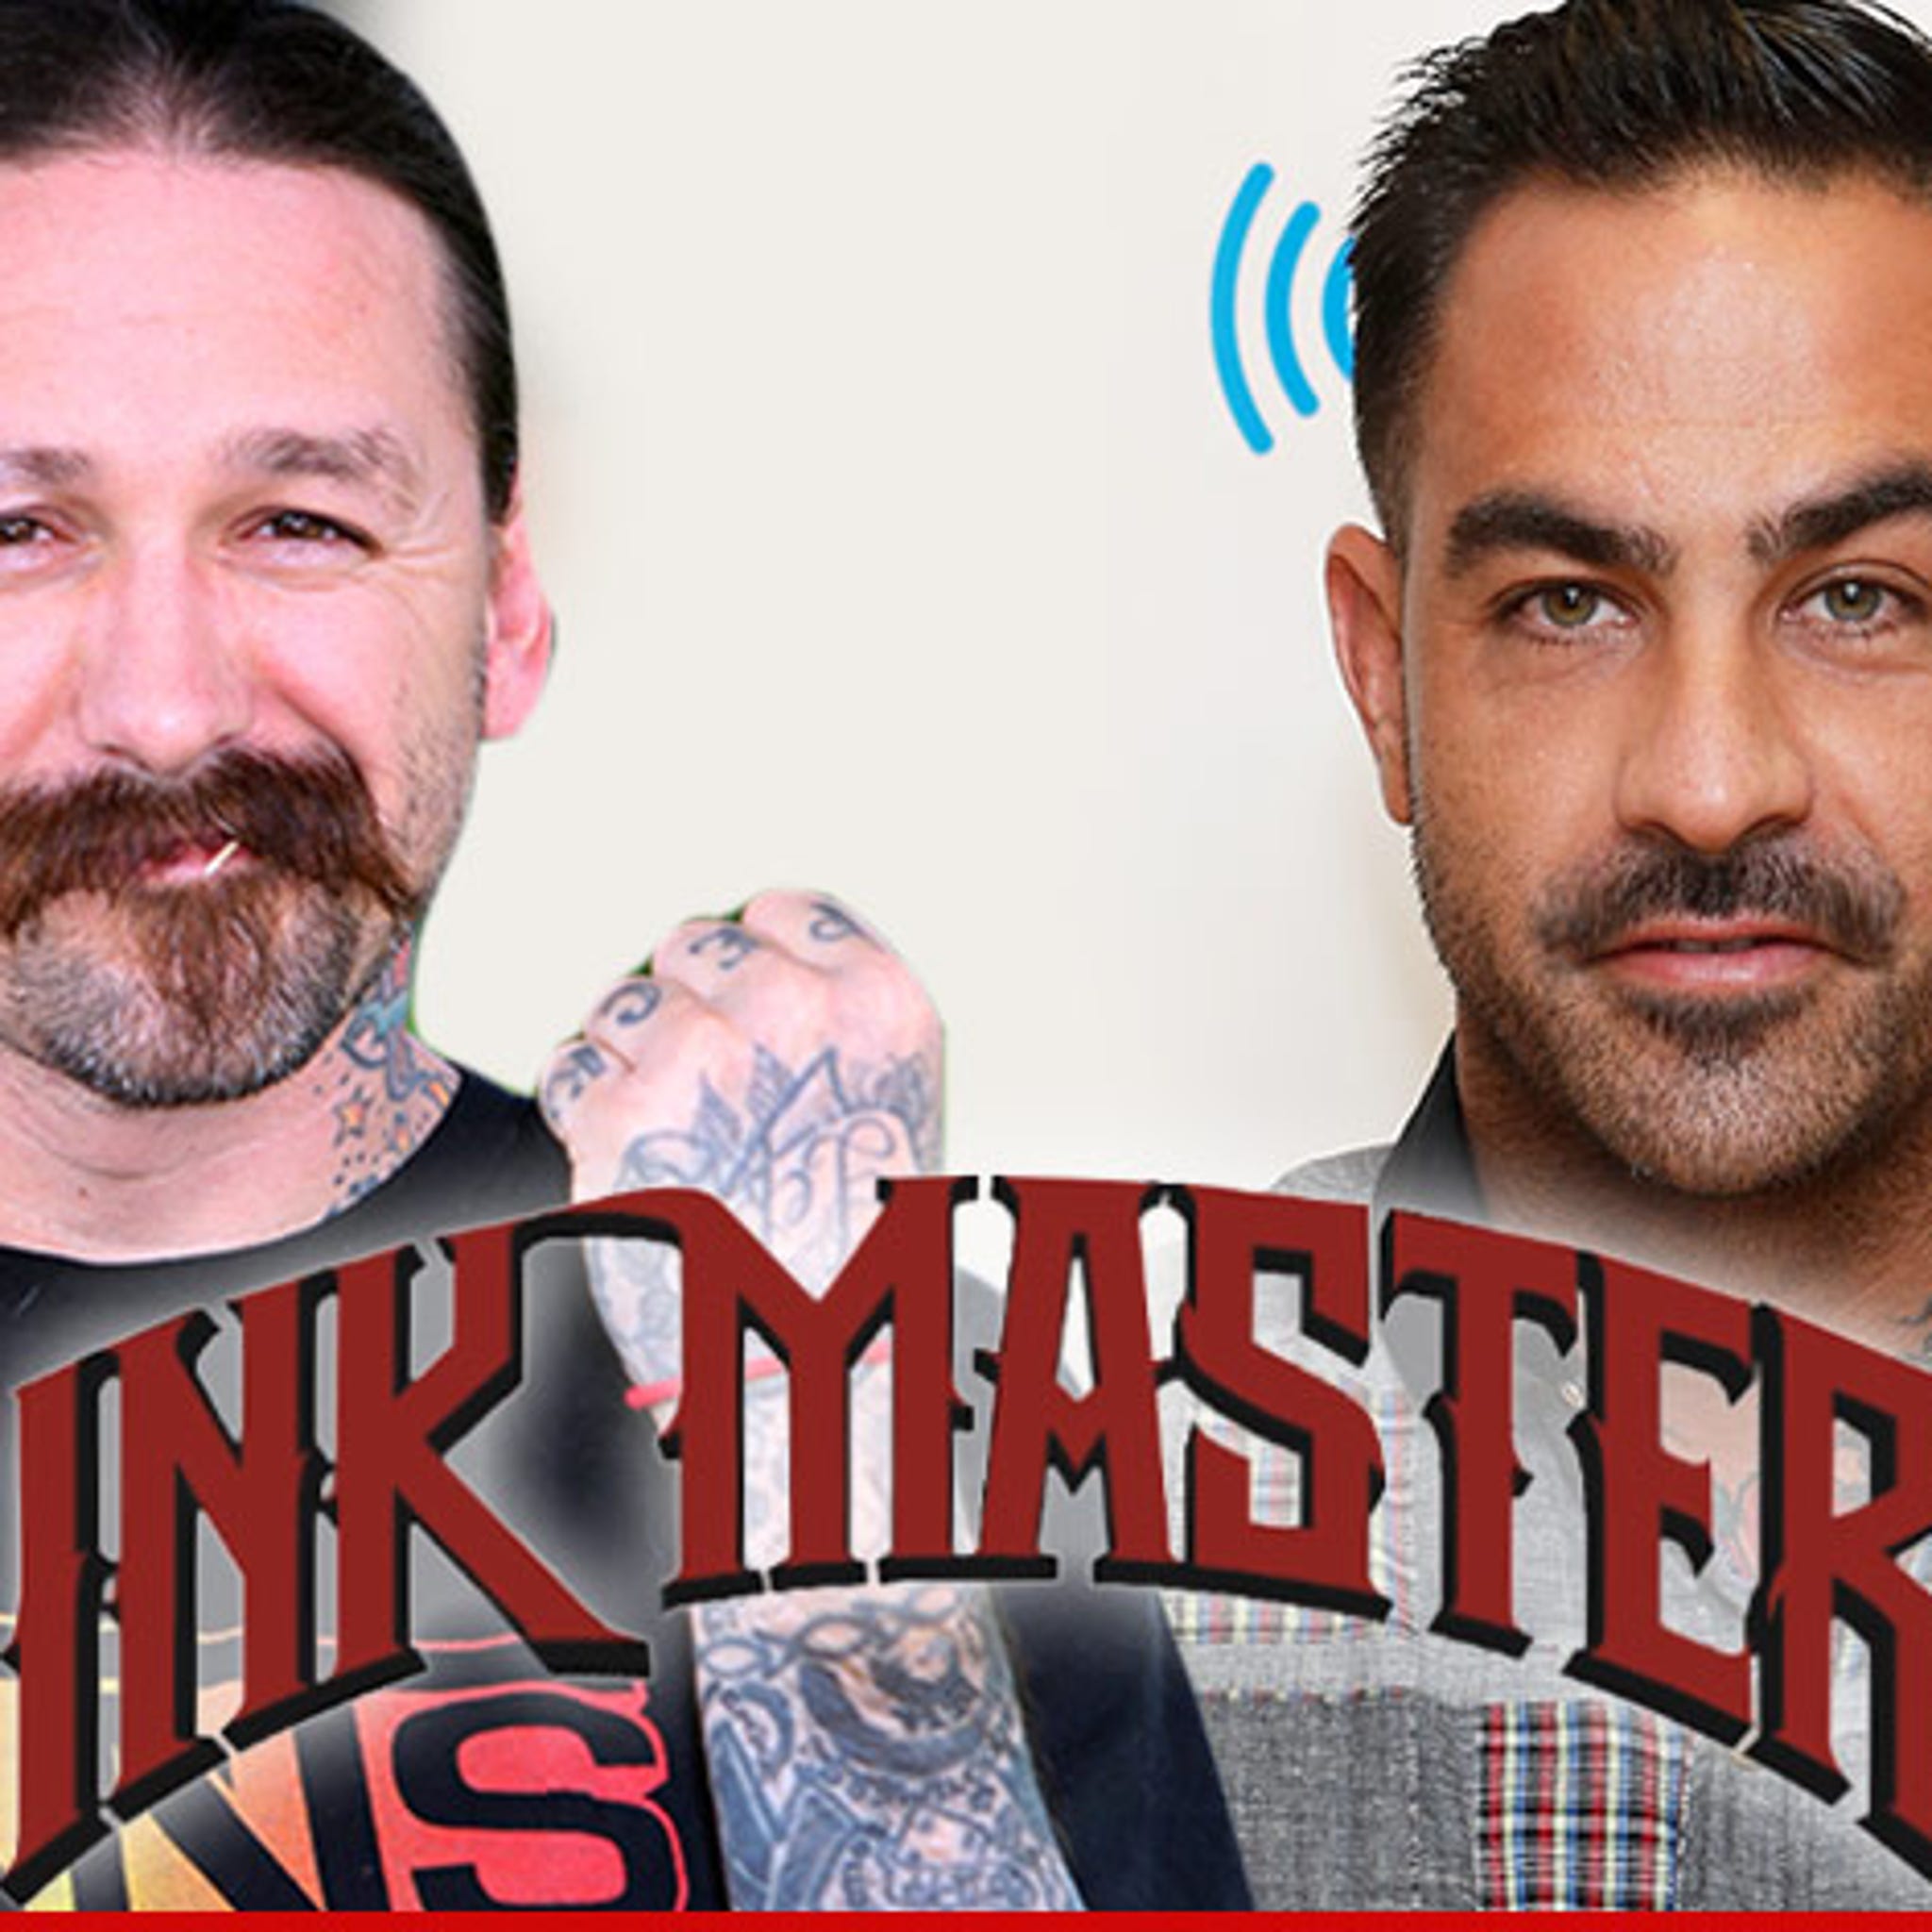 Ink Master' Stars Sued -- They Said I Could 'Go Home And Suck Some D***s'